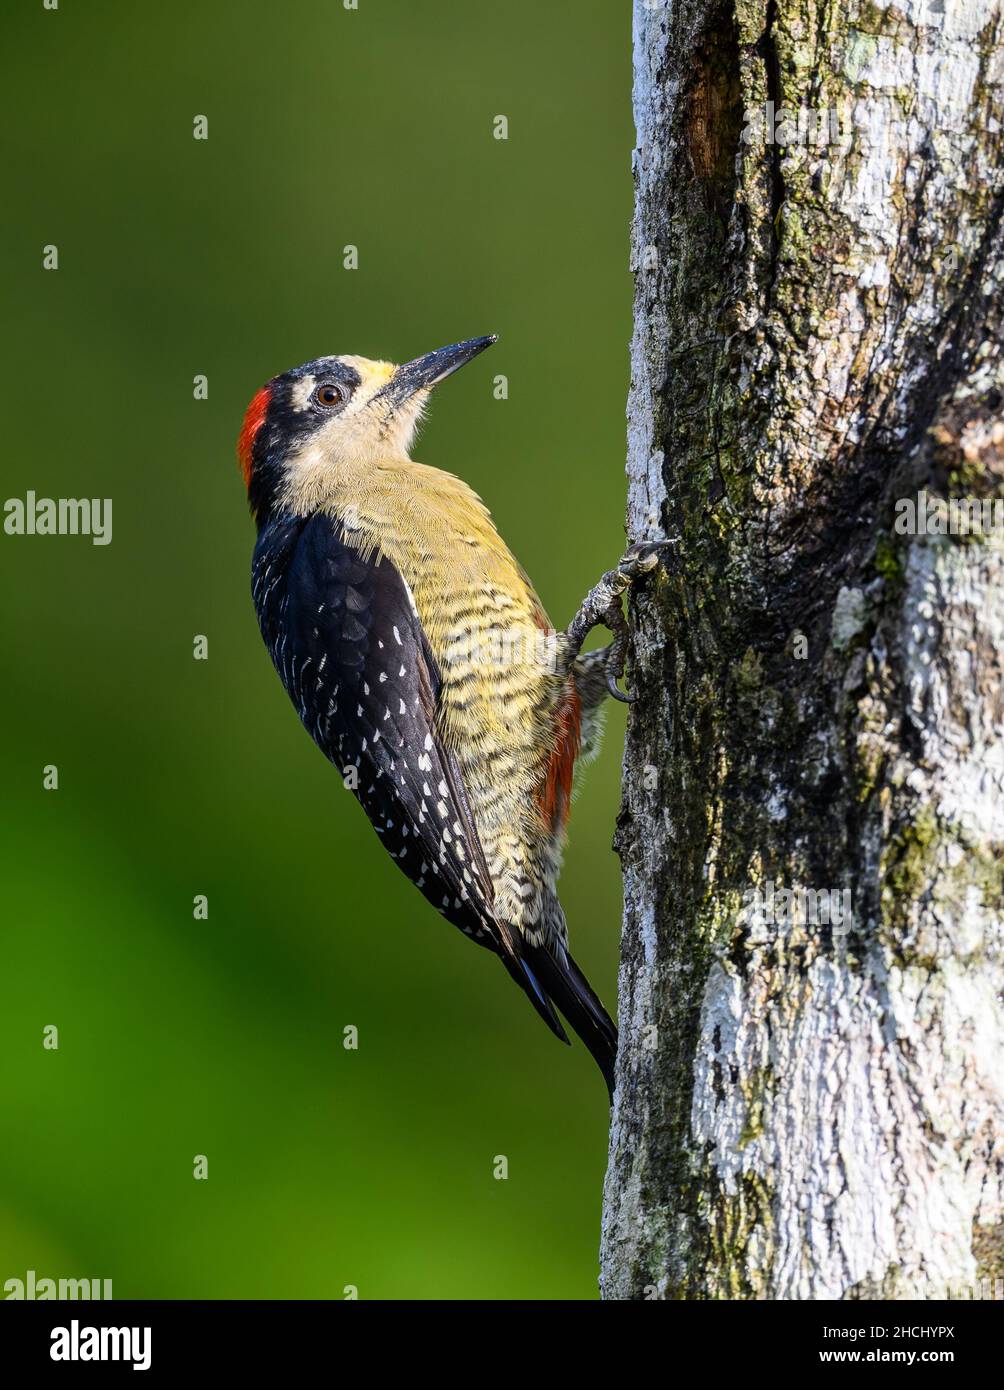 A Black-cheeked Woodpecker (Melanerpes pucherani) foraging on a tree trunk. Costa Rica, Central America. Stock Photo